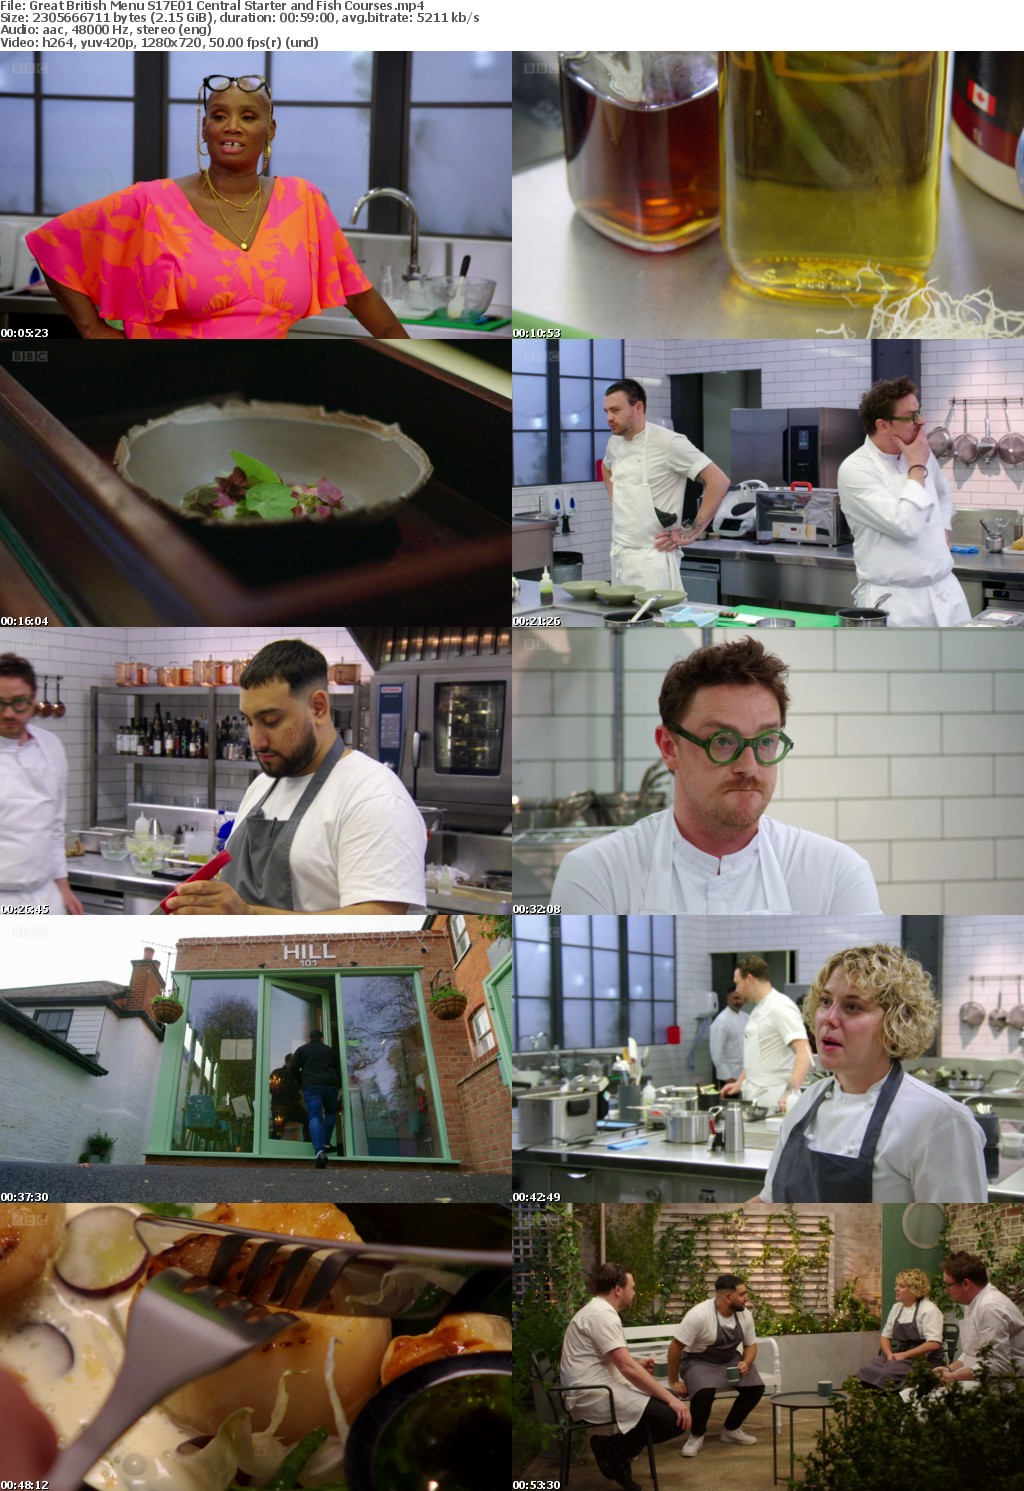 Great British Menu S17E01 Central Starter and Fish Courses (1280x720p HD, 50fps, soft Eng subs)